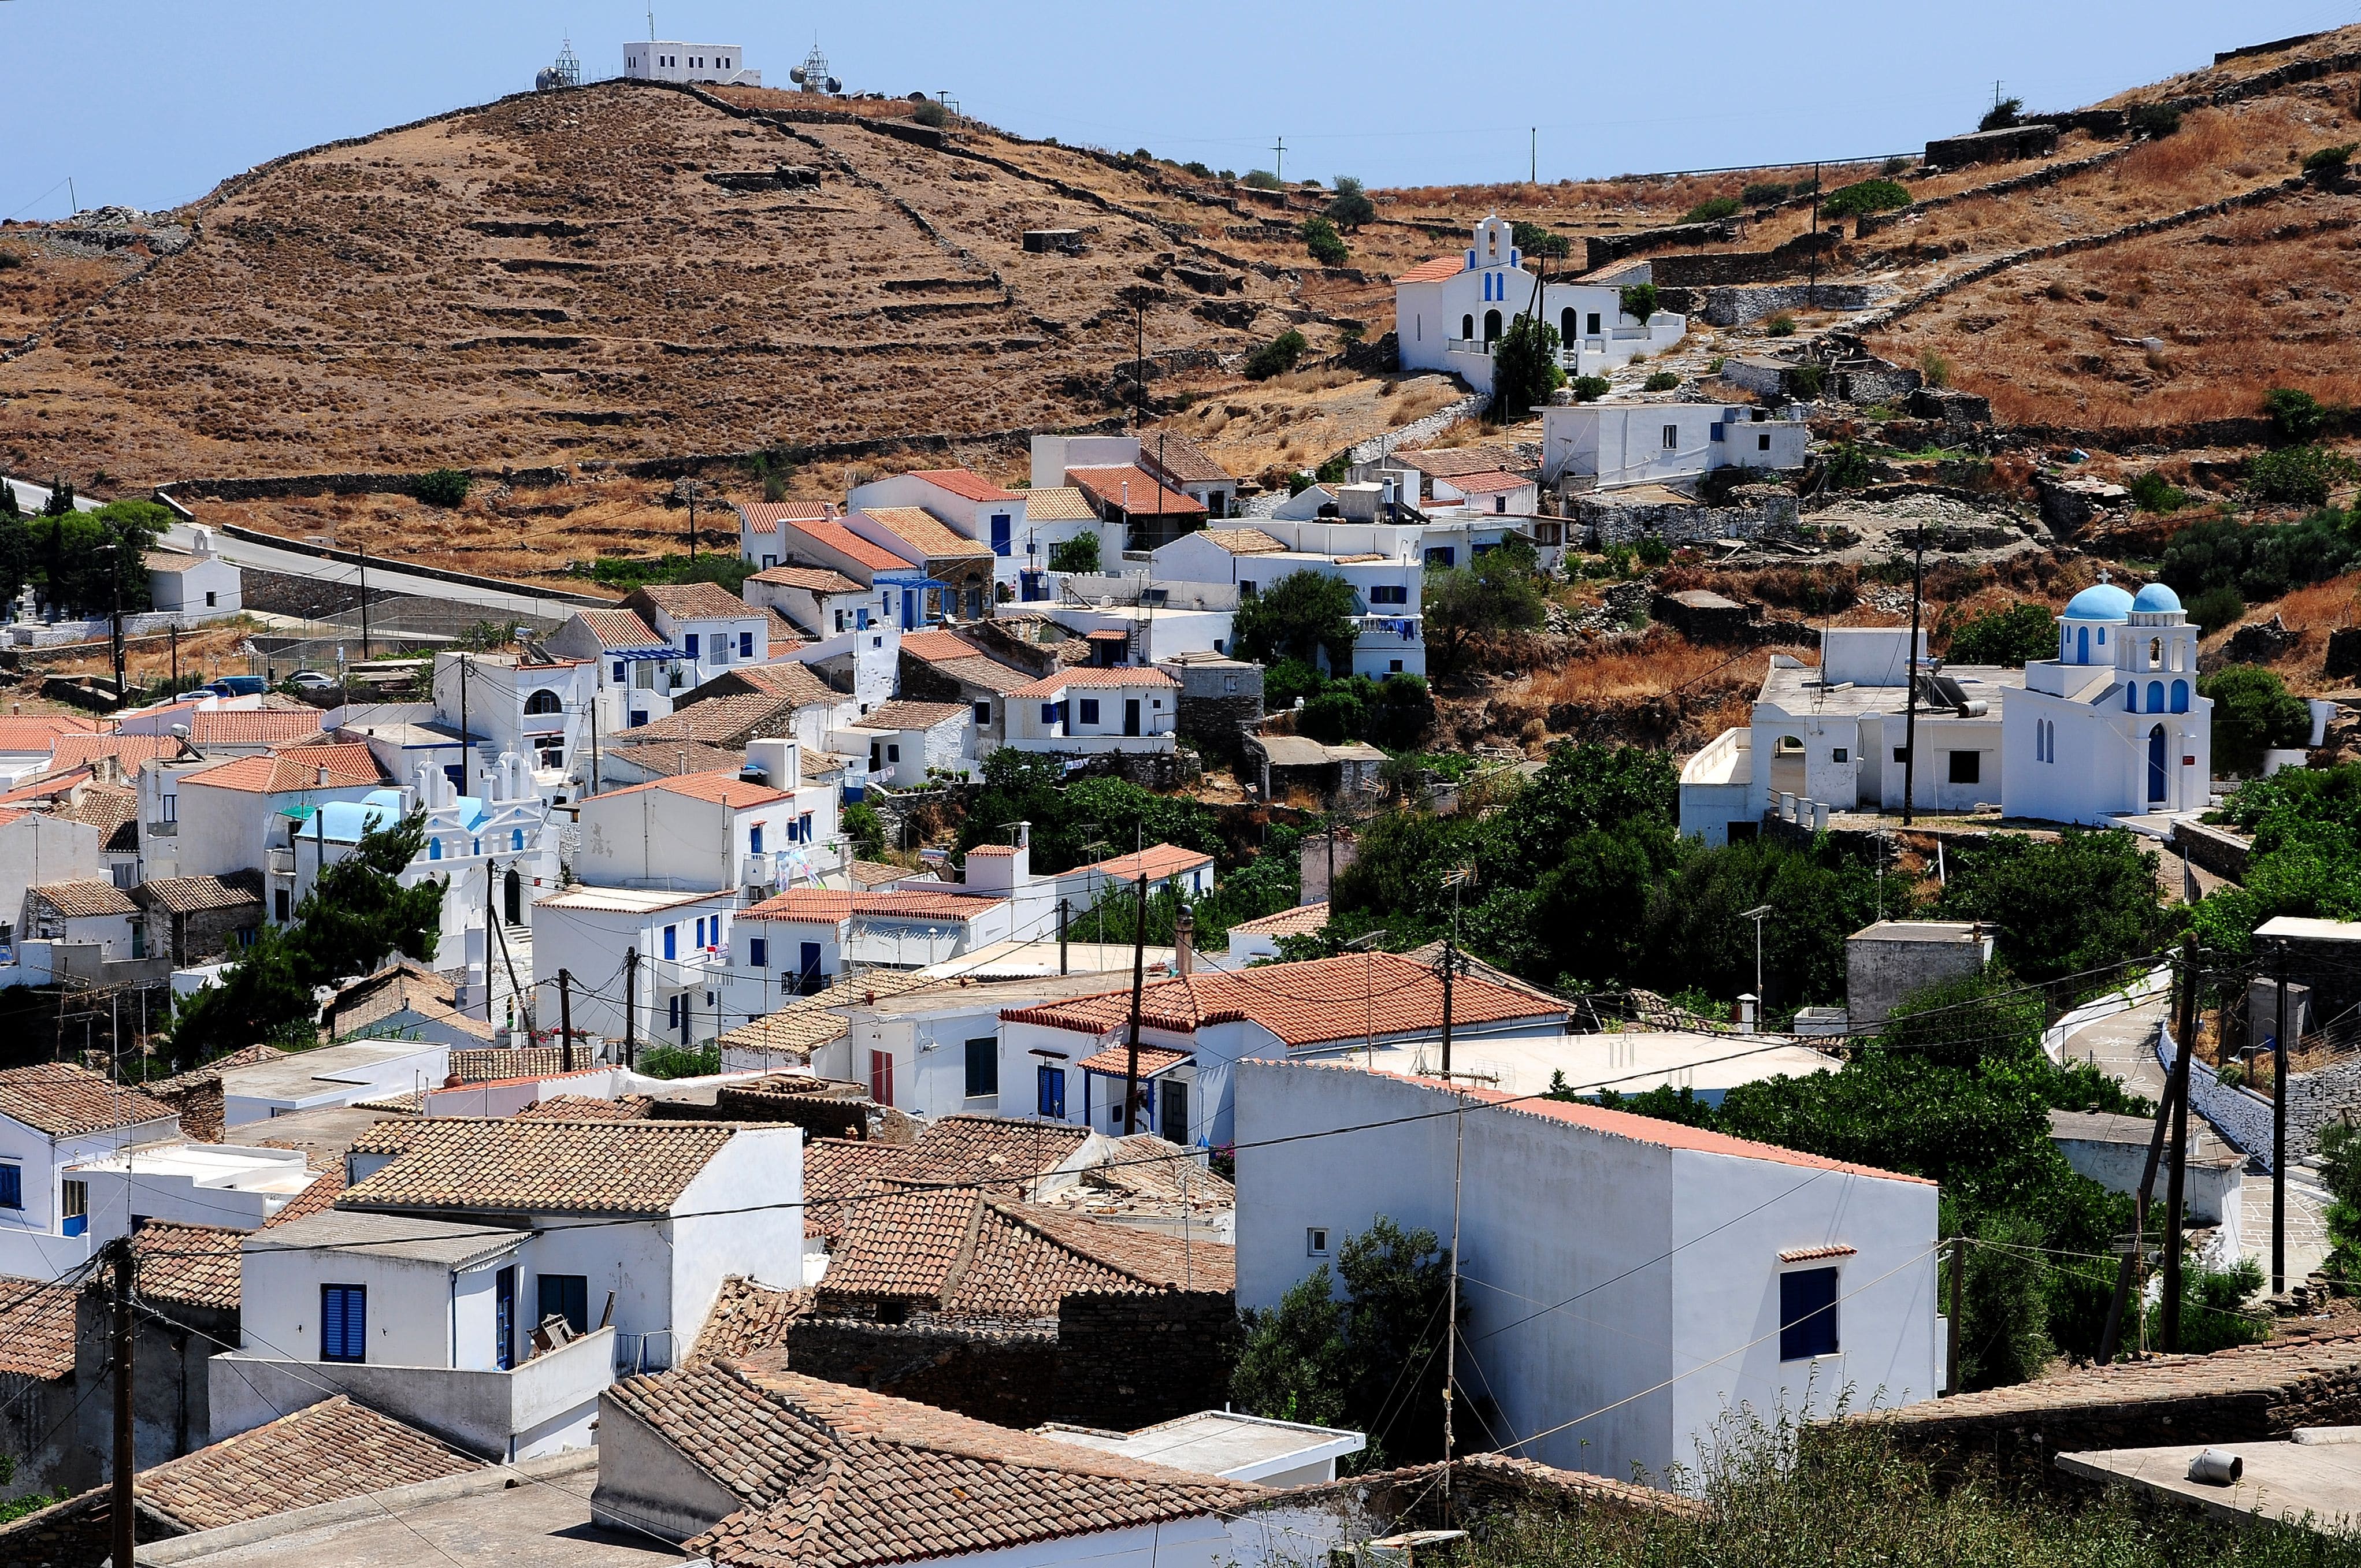 Kythnos: The economic island for unforgettable holidays